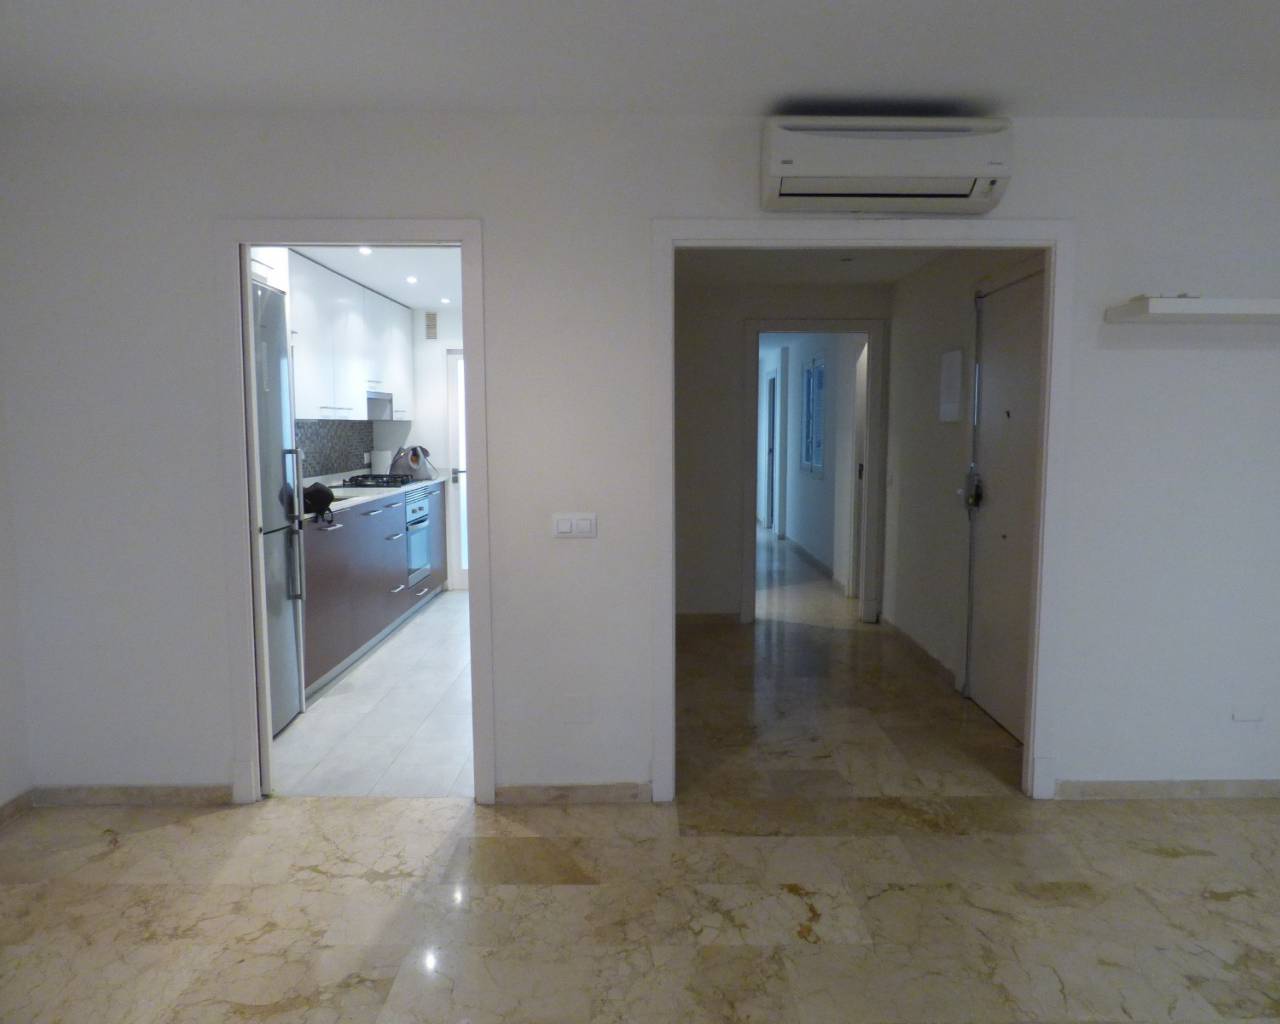 Property for rent in Palma,Mallorca